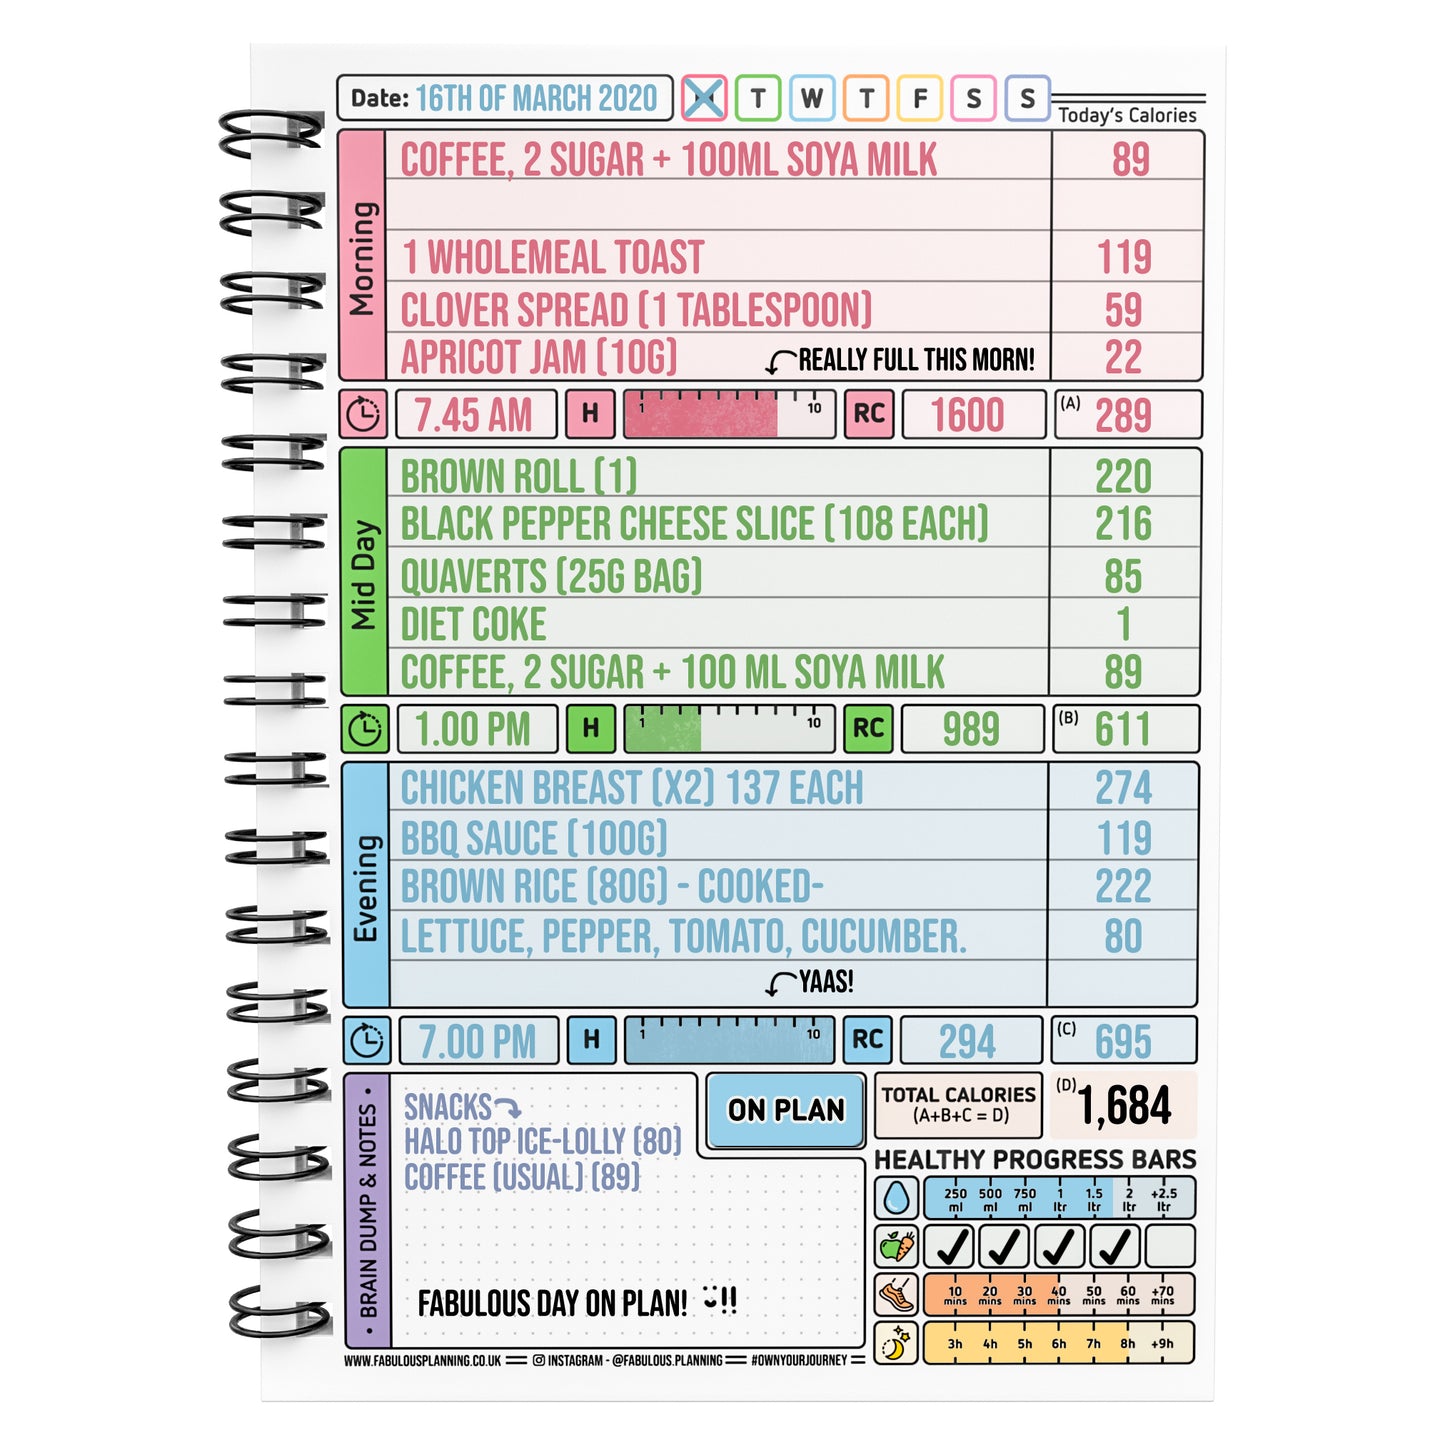 Food Diary - C27 - Calorie Counting